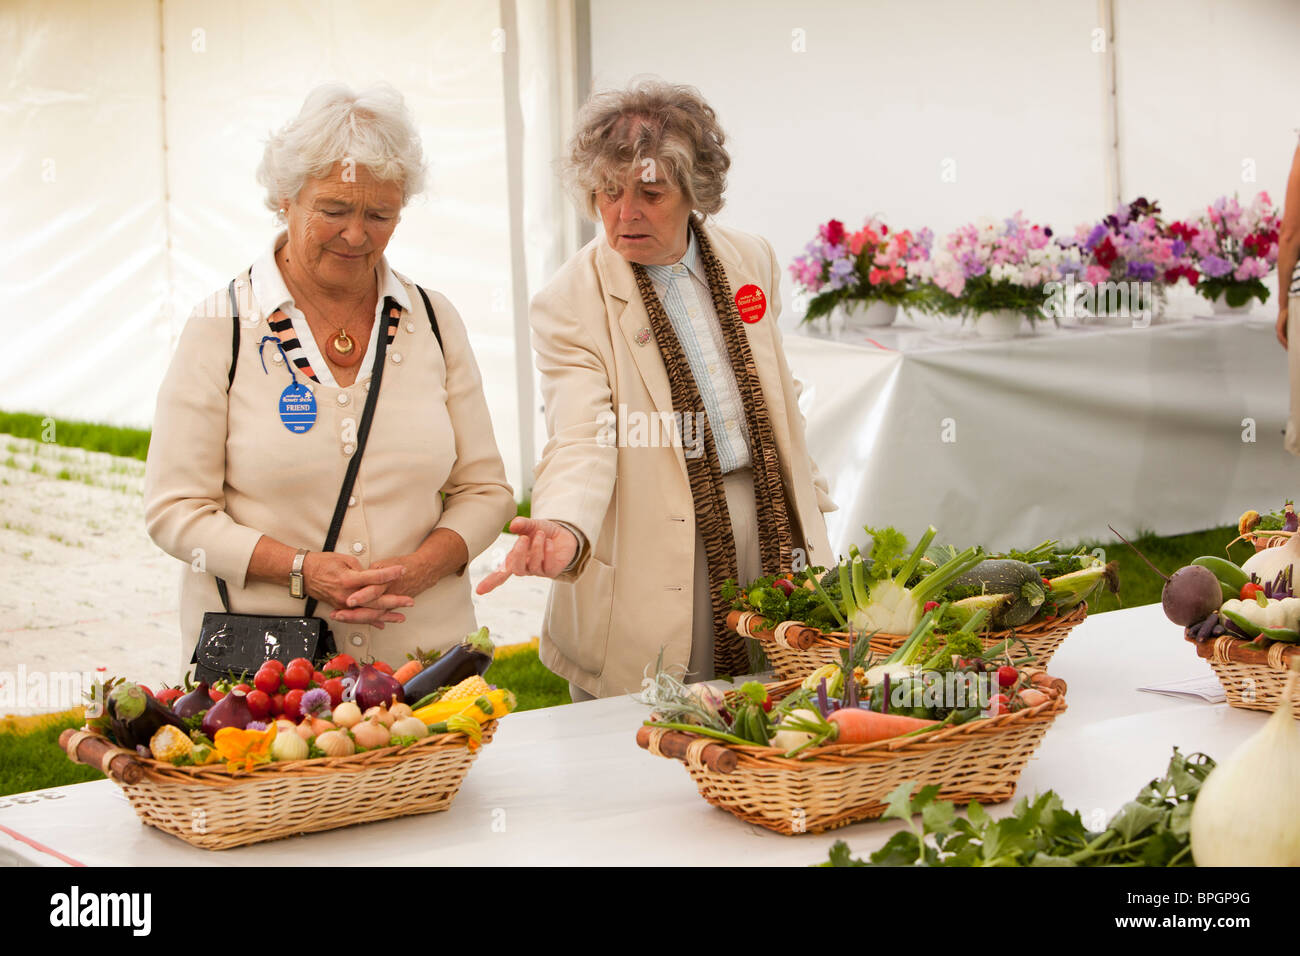 UK, England, Merseyside, Southport Flower Show, exhibitor pointing out baskets of mixed vegetables to friend Stock Photo